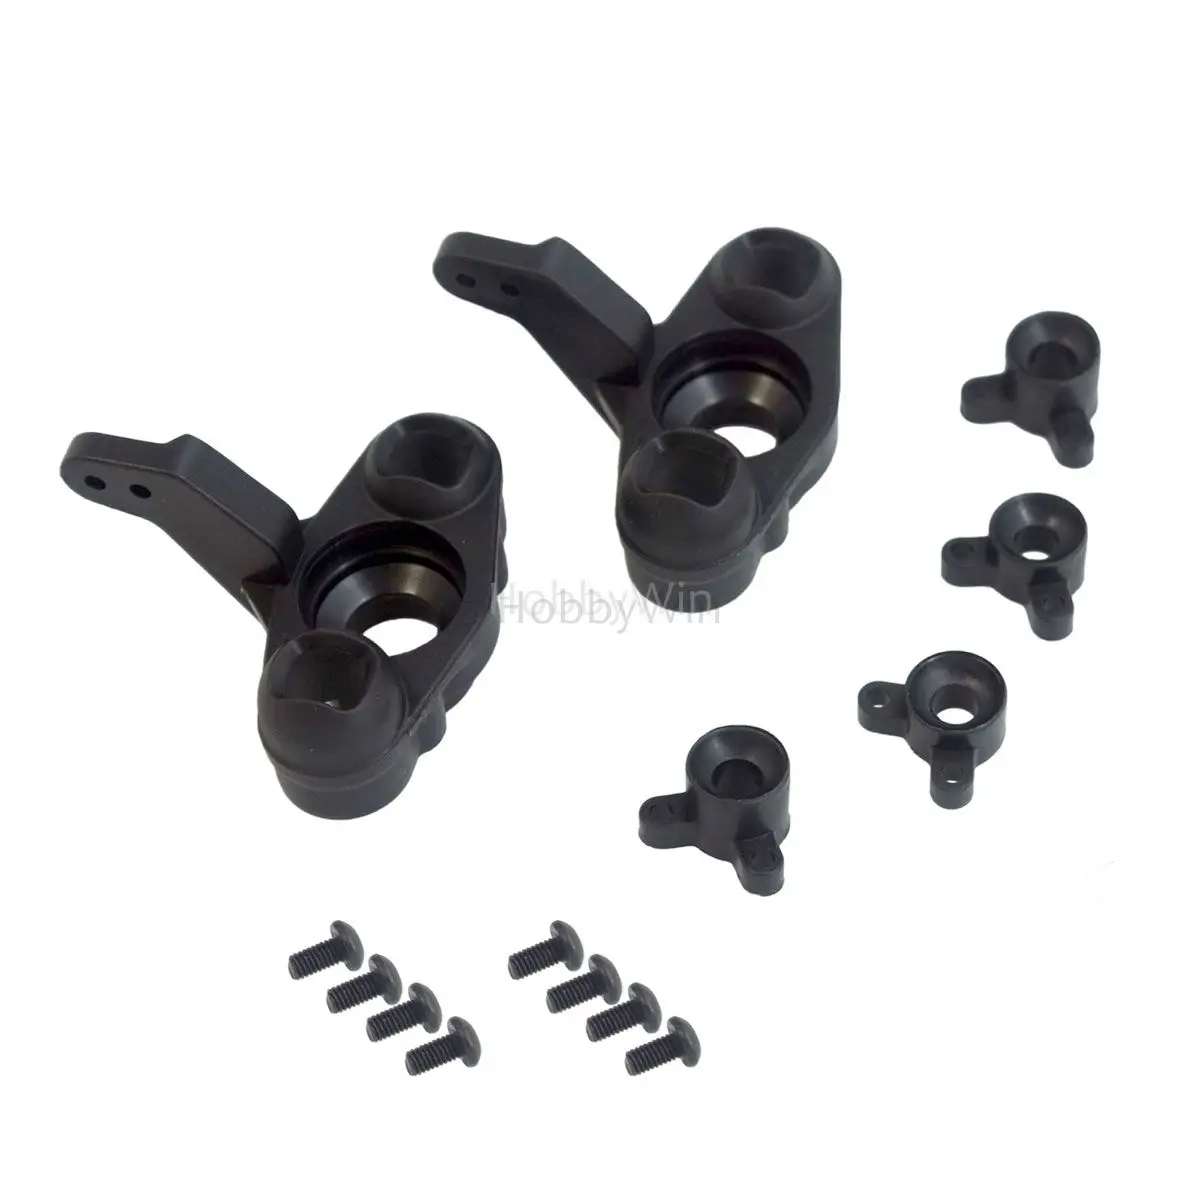 SST part 09219B Right Hubs NEW Version for Saisu 1/9 1/10 RC Buggy Truck